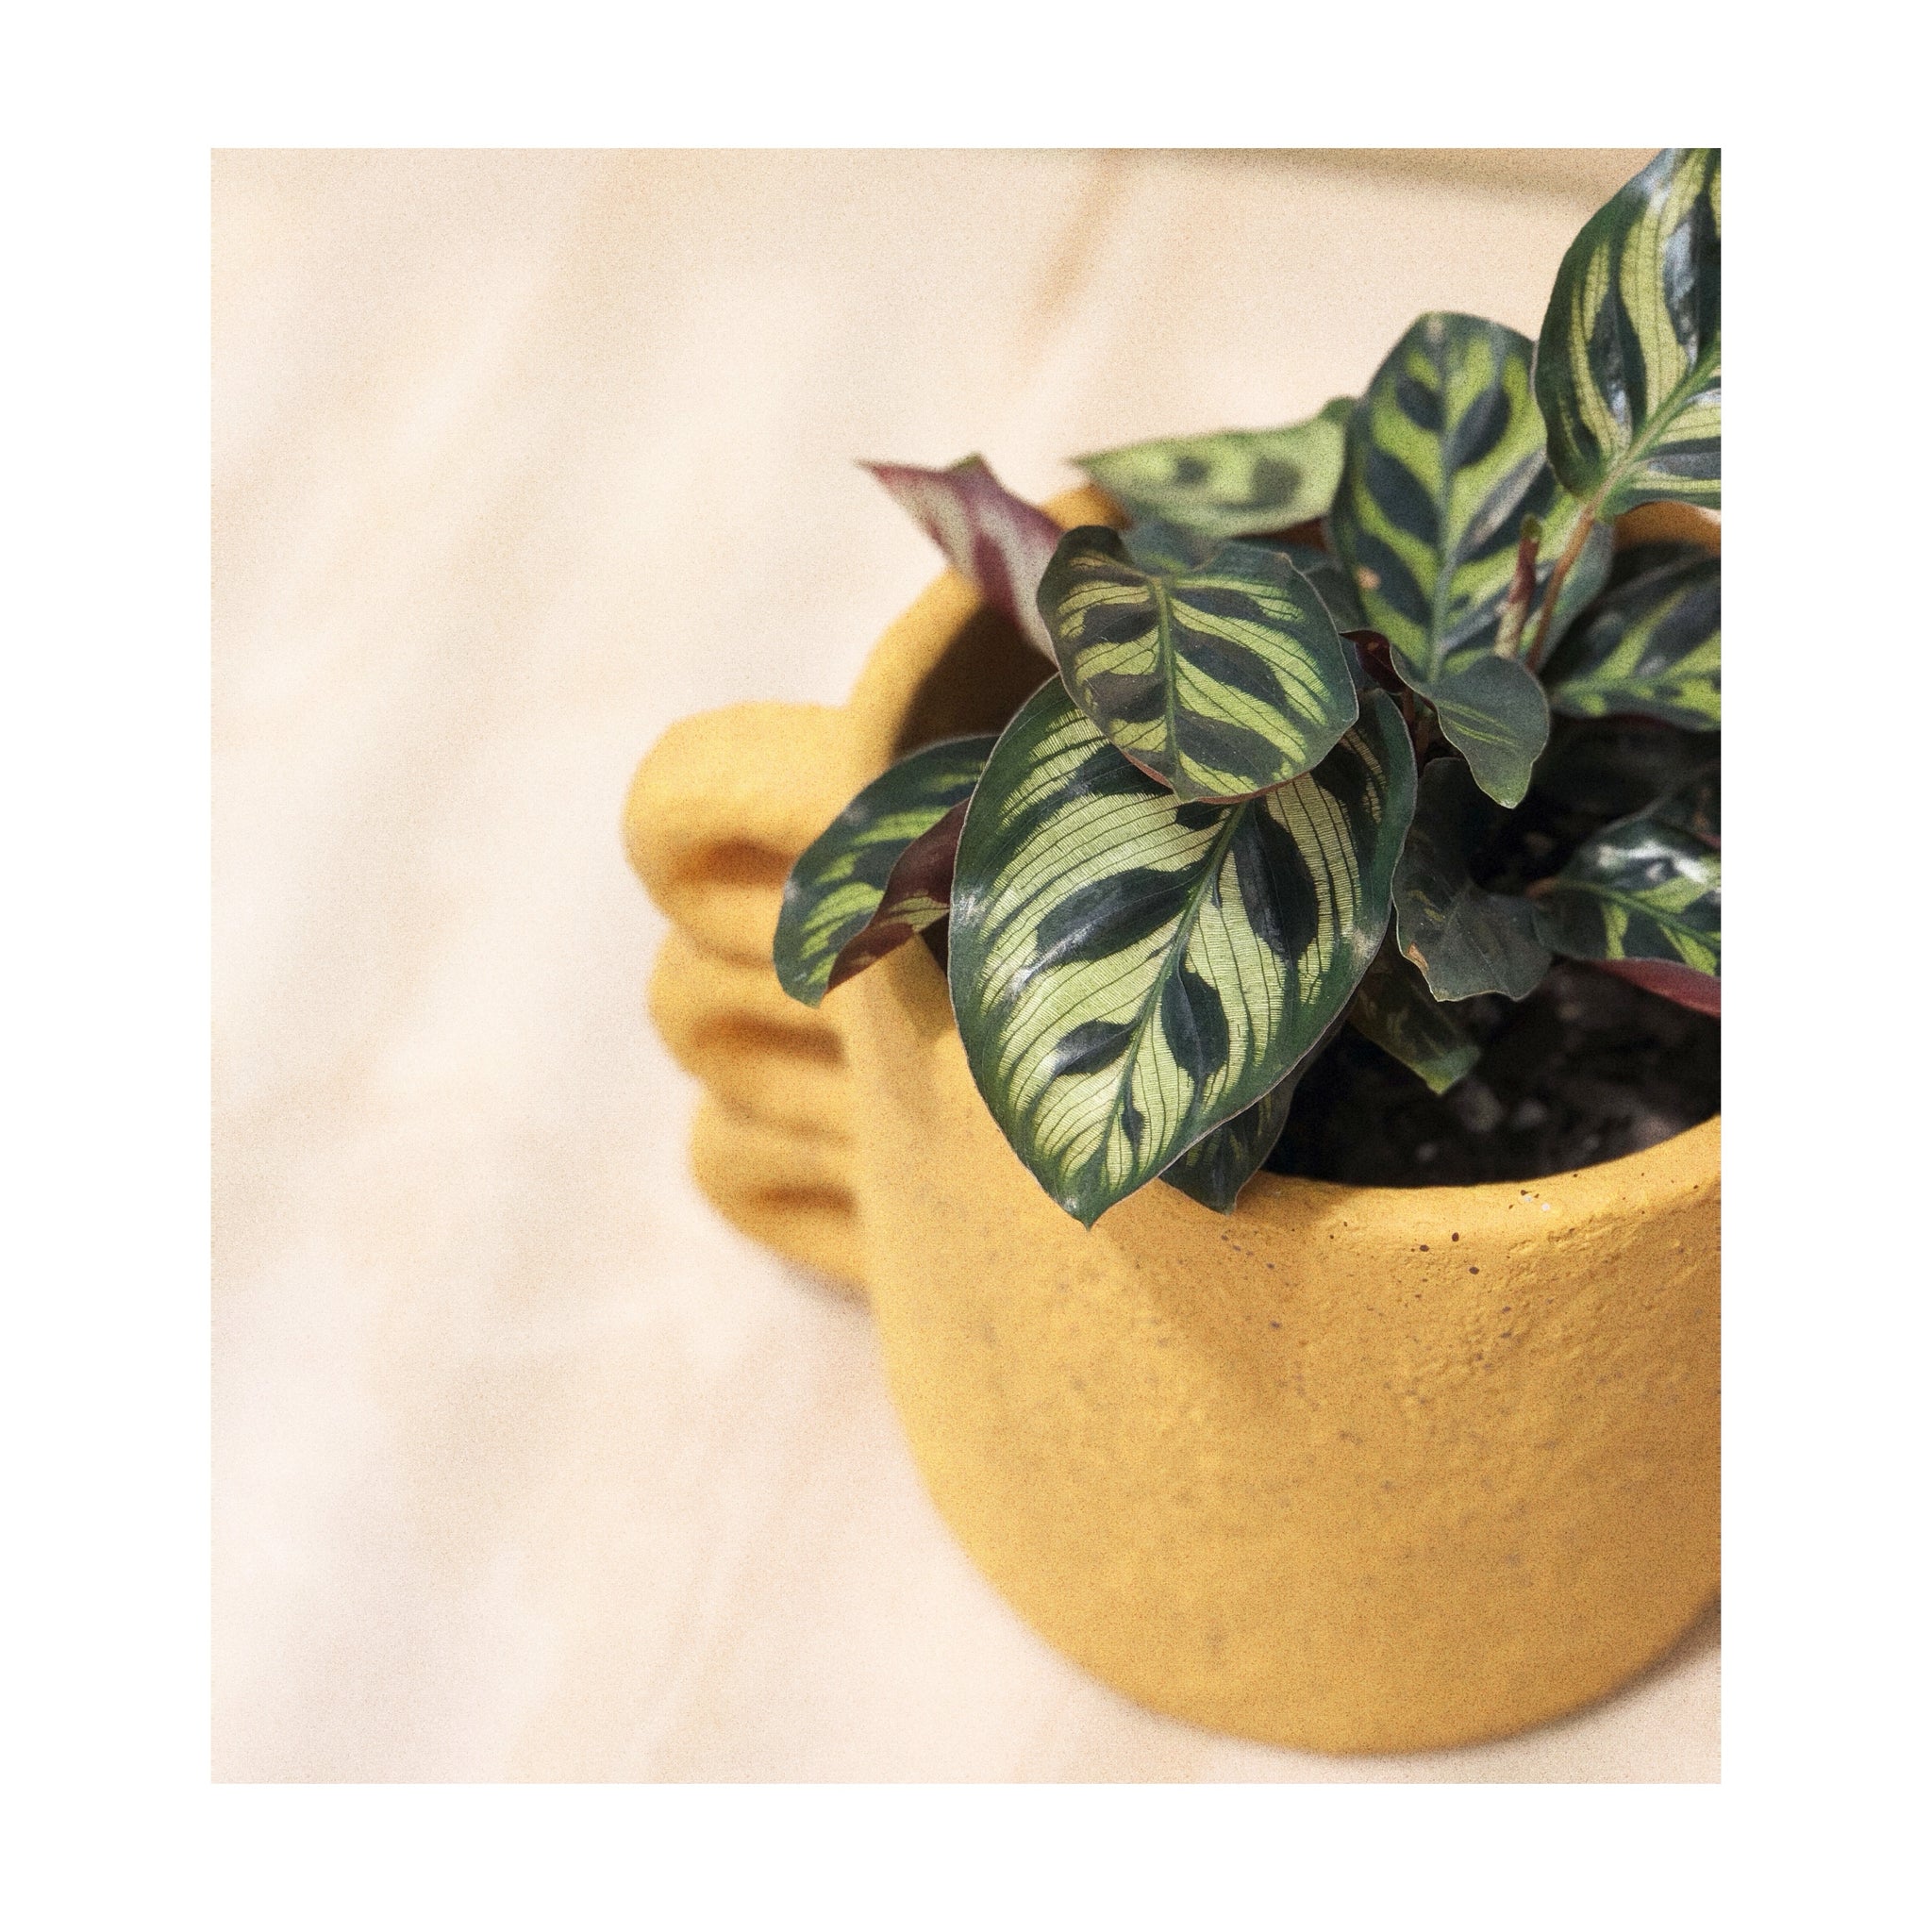 Peacock Plant (Calathea Makoyana) paired with the Loops Cement Pot Mustard